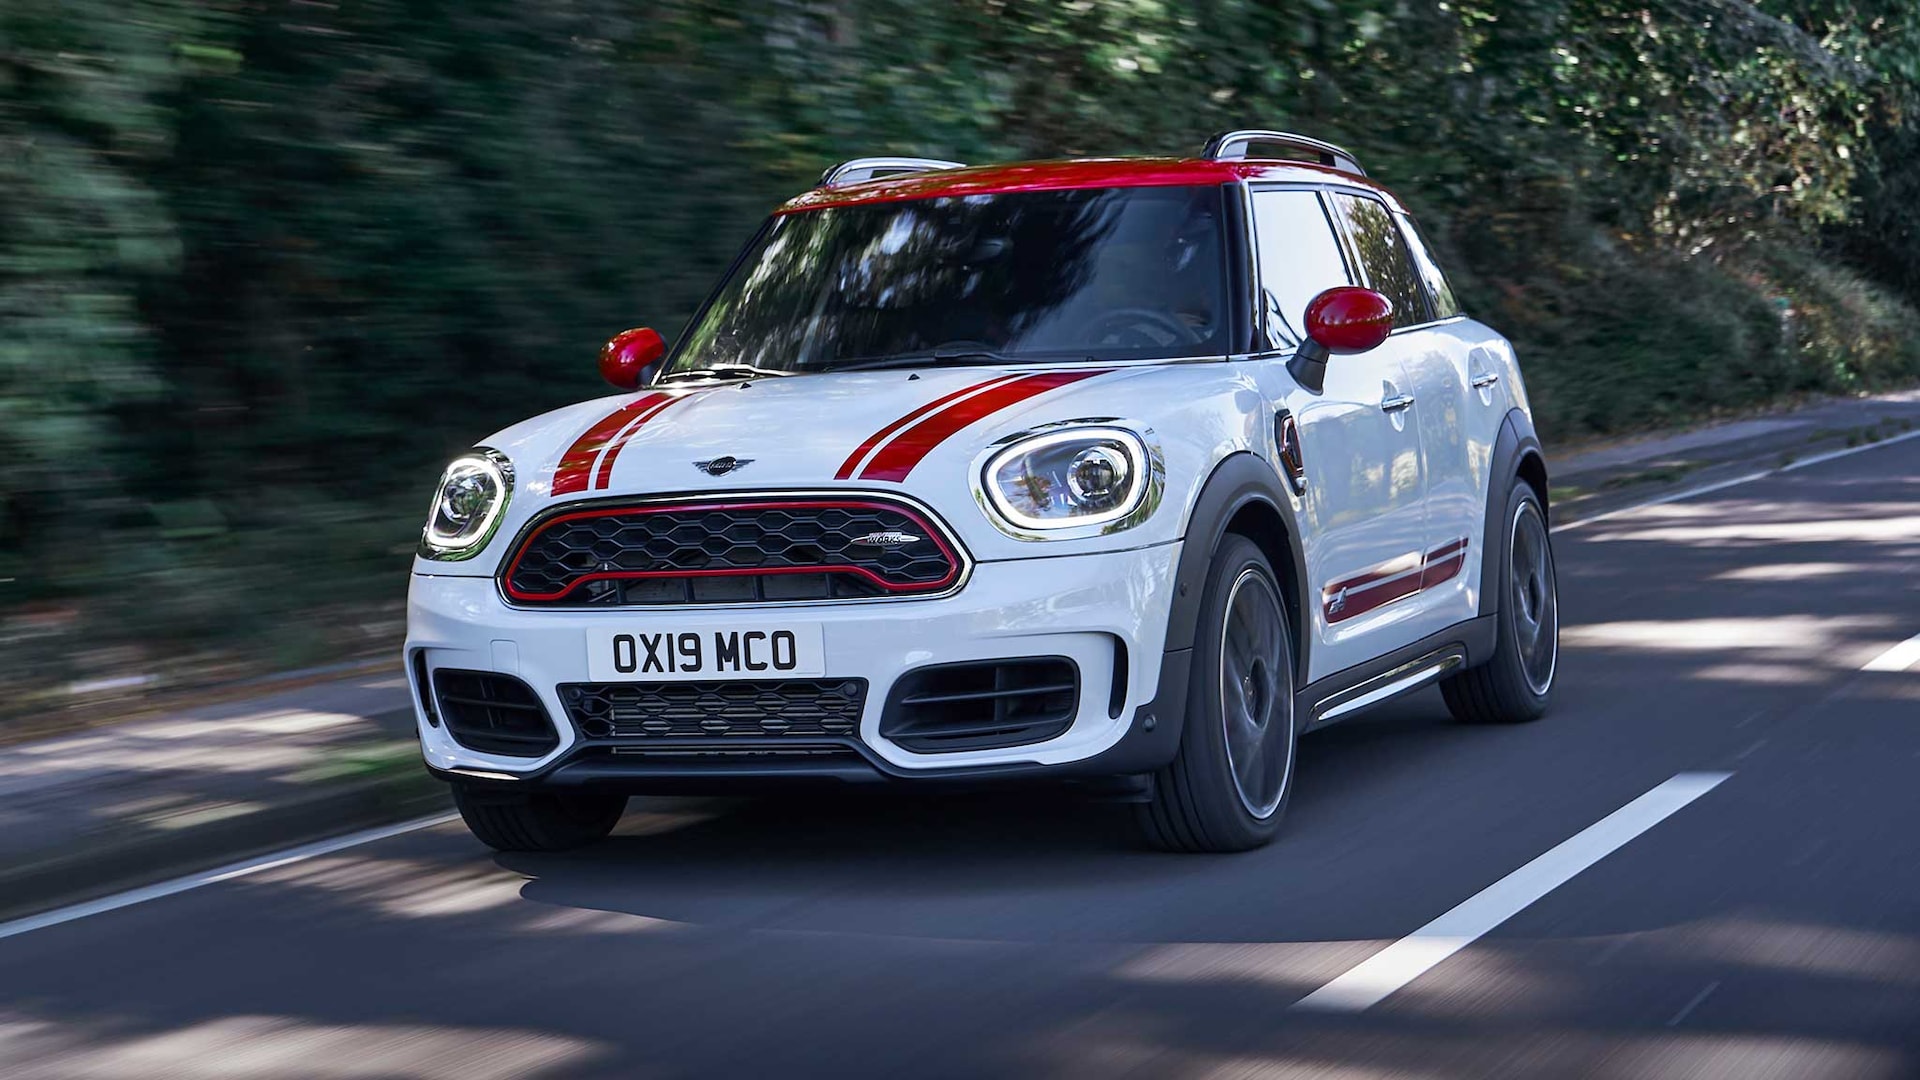 2020 MINI Countryman Prices, Reviews, and Photos - MotorTrend